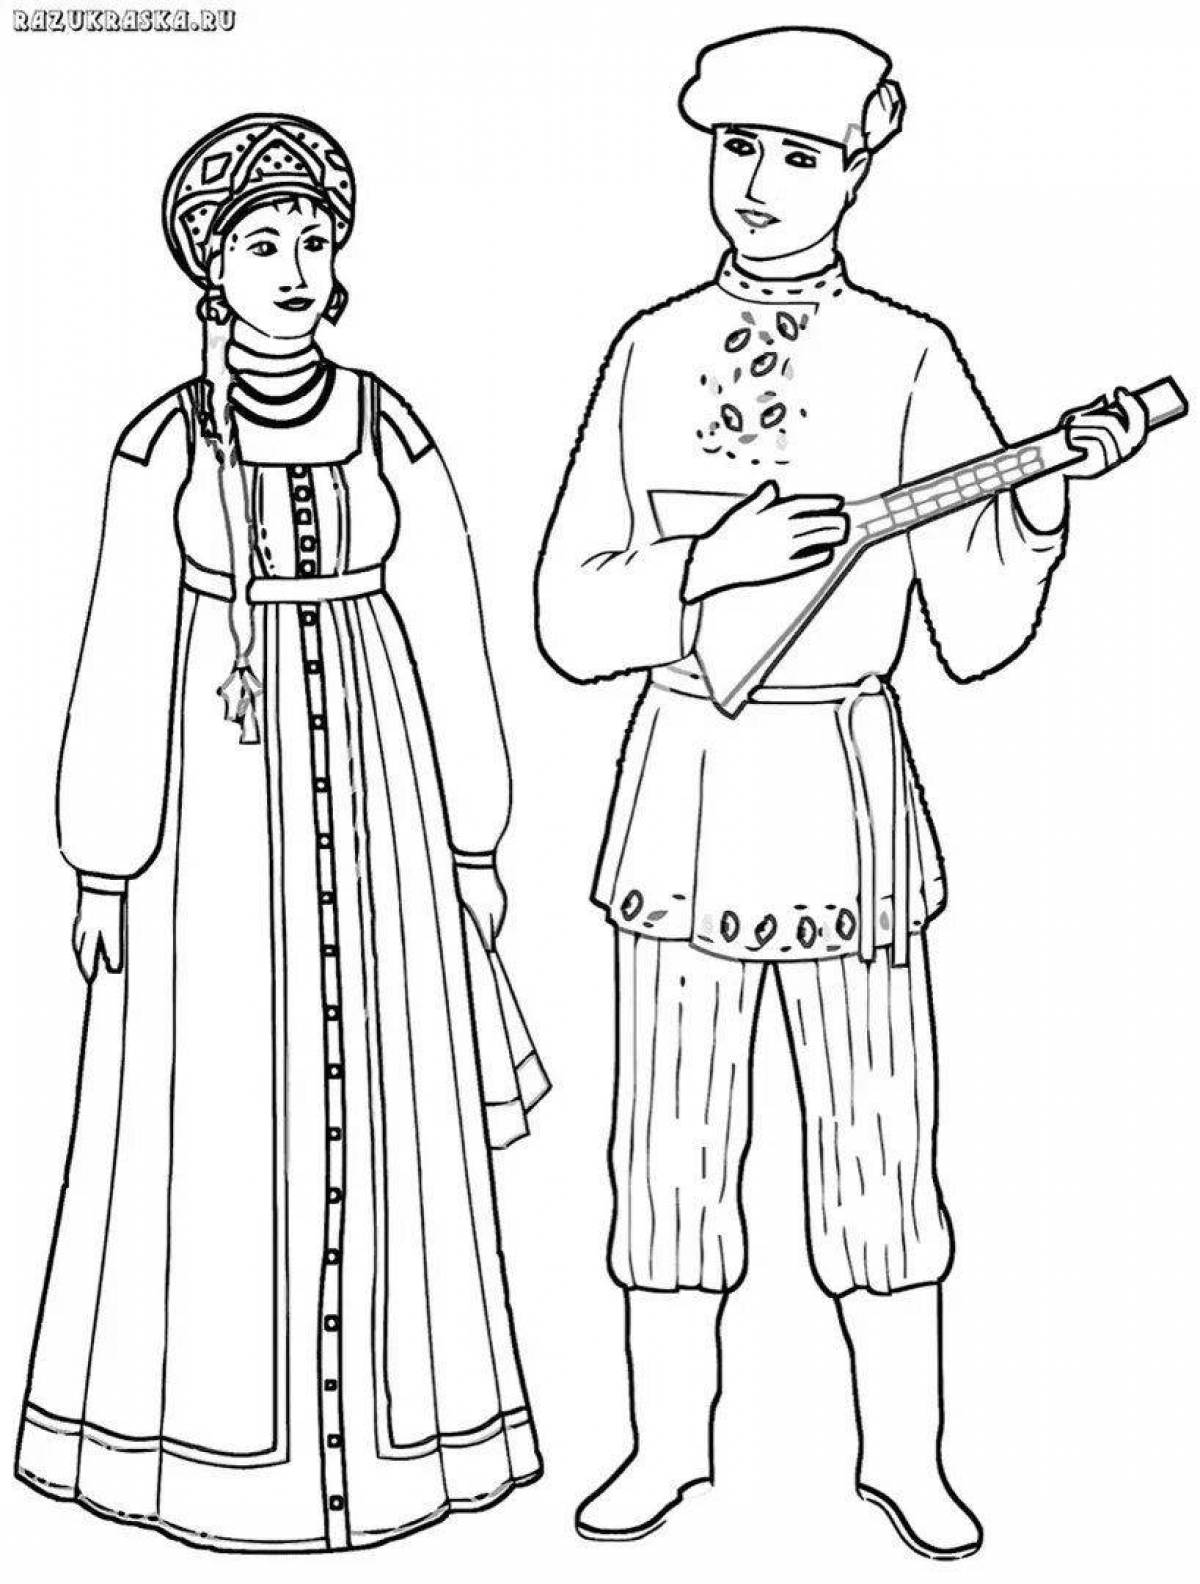 Coloring page cheerful Belarusian costume